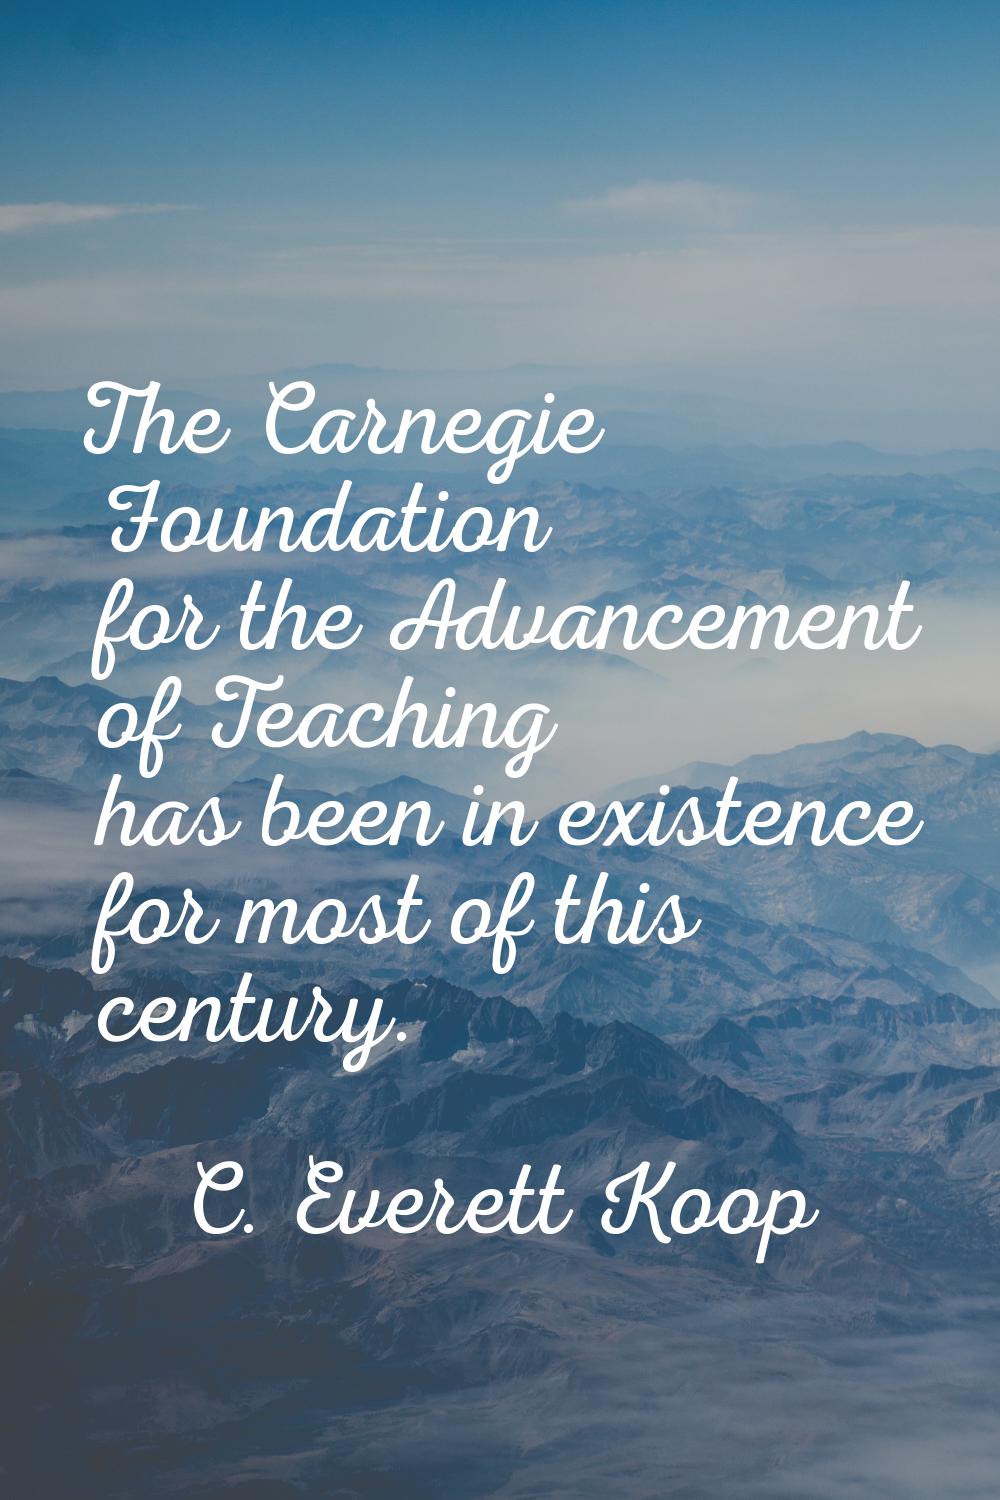 The Carnegie Foundation for the Advancement of Teaching has been in existence for most of this cent